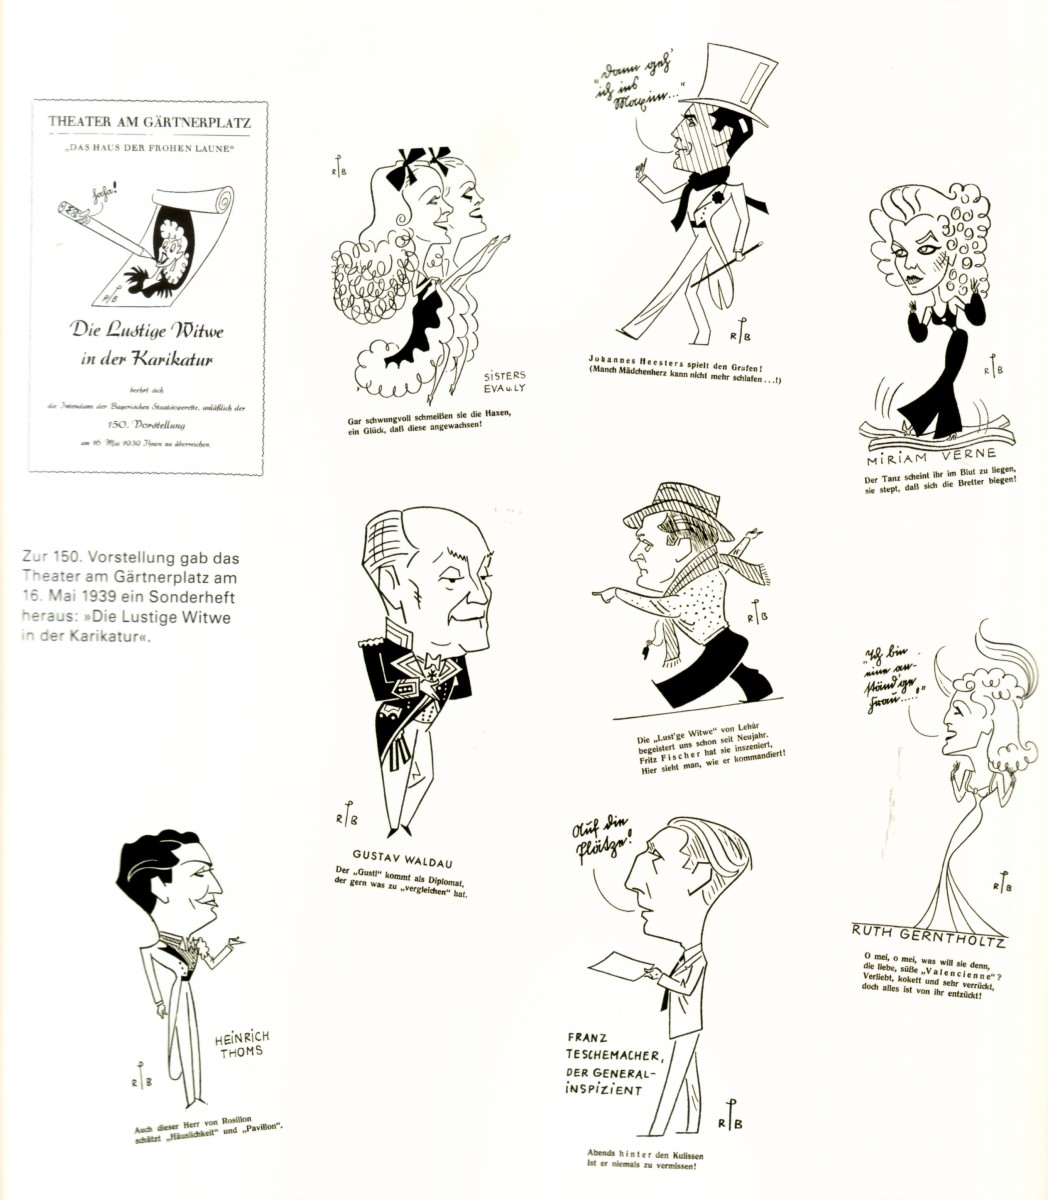 The "Merry Widow" in Munich, 1938, production by Fritz Fischer. A page from the program booklet.